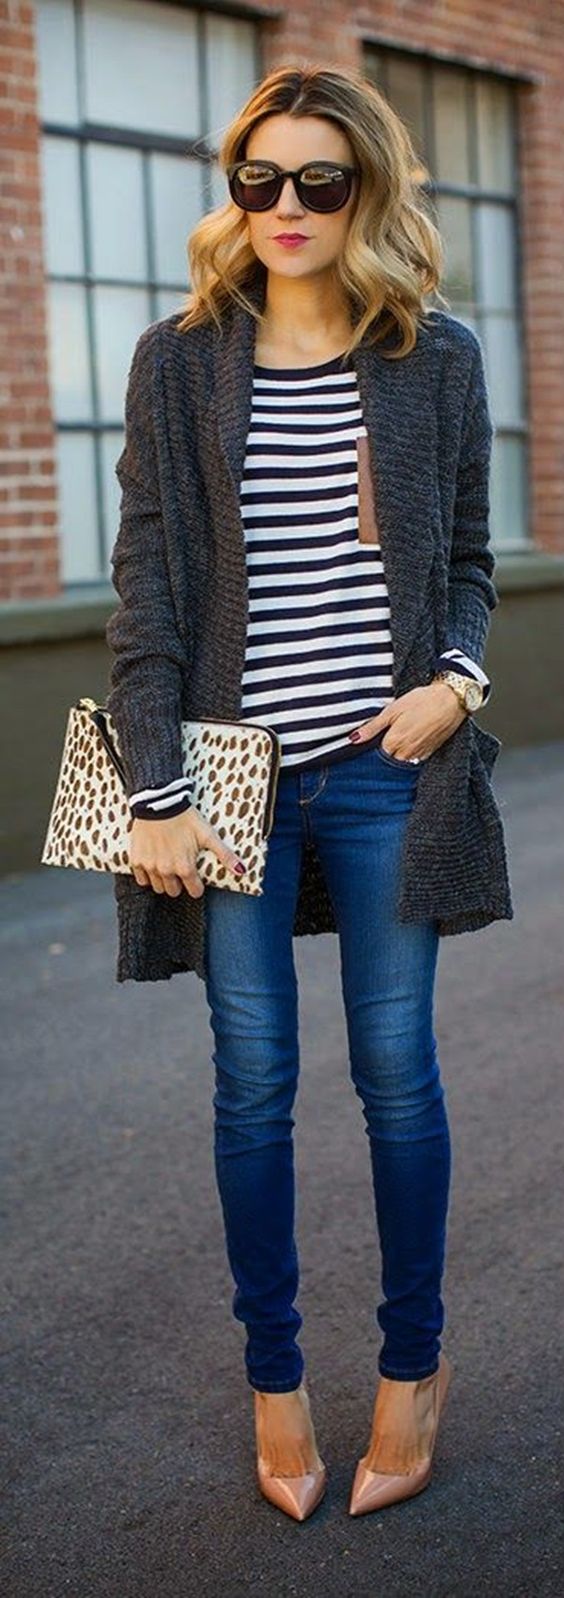 Stylish Chic Long Cardigan Outfit